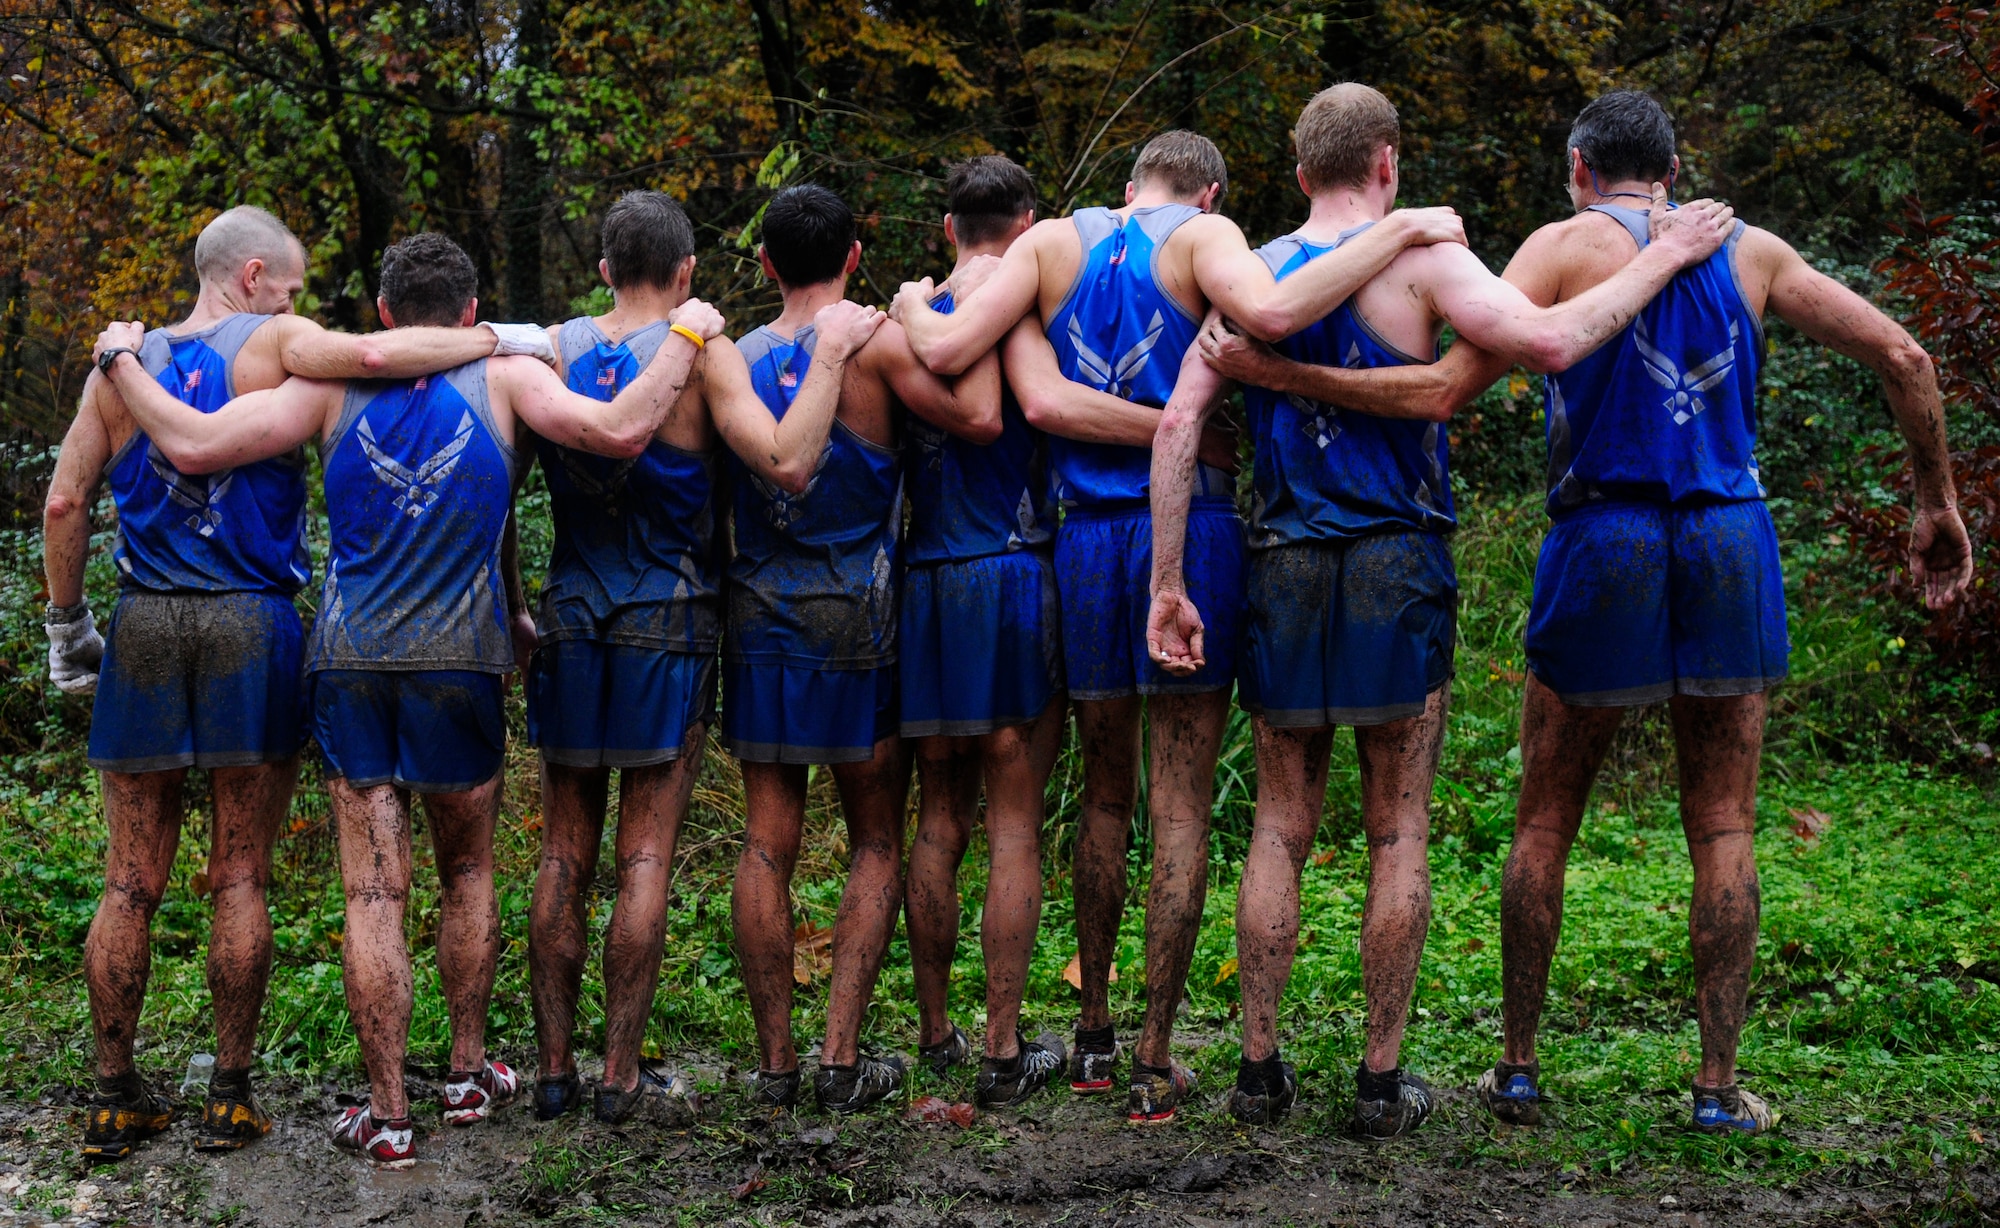 Members of the U.S. Air Force team pose for a photo showing their backs after running through muddy trails in the Allied Forces Cross Country Championships Nov. 9 in Budoia, Italy. Members from different European air forces, including England, Germany and Poland, competed in the championships. (U.S. Air Force photo by Airman 1st Class Katherine Windish)